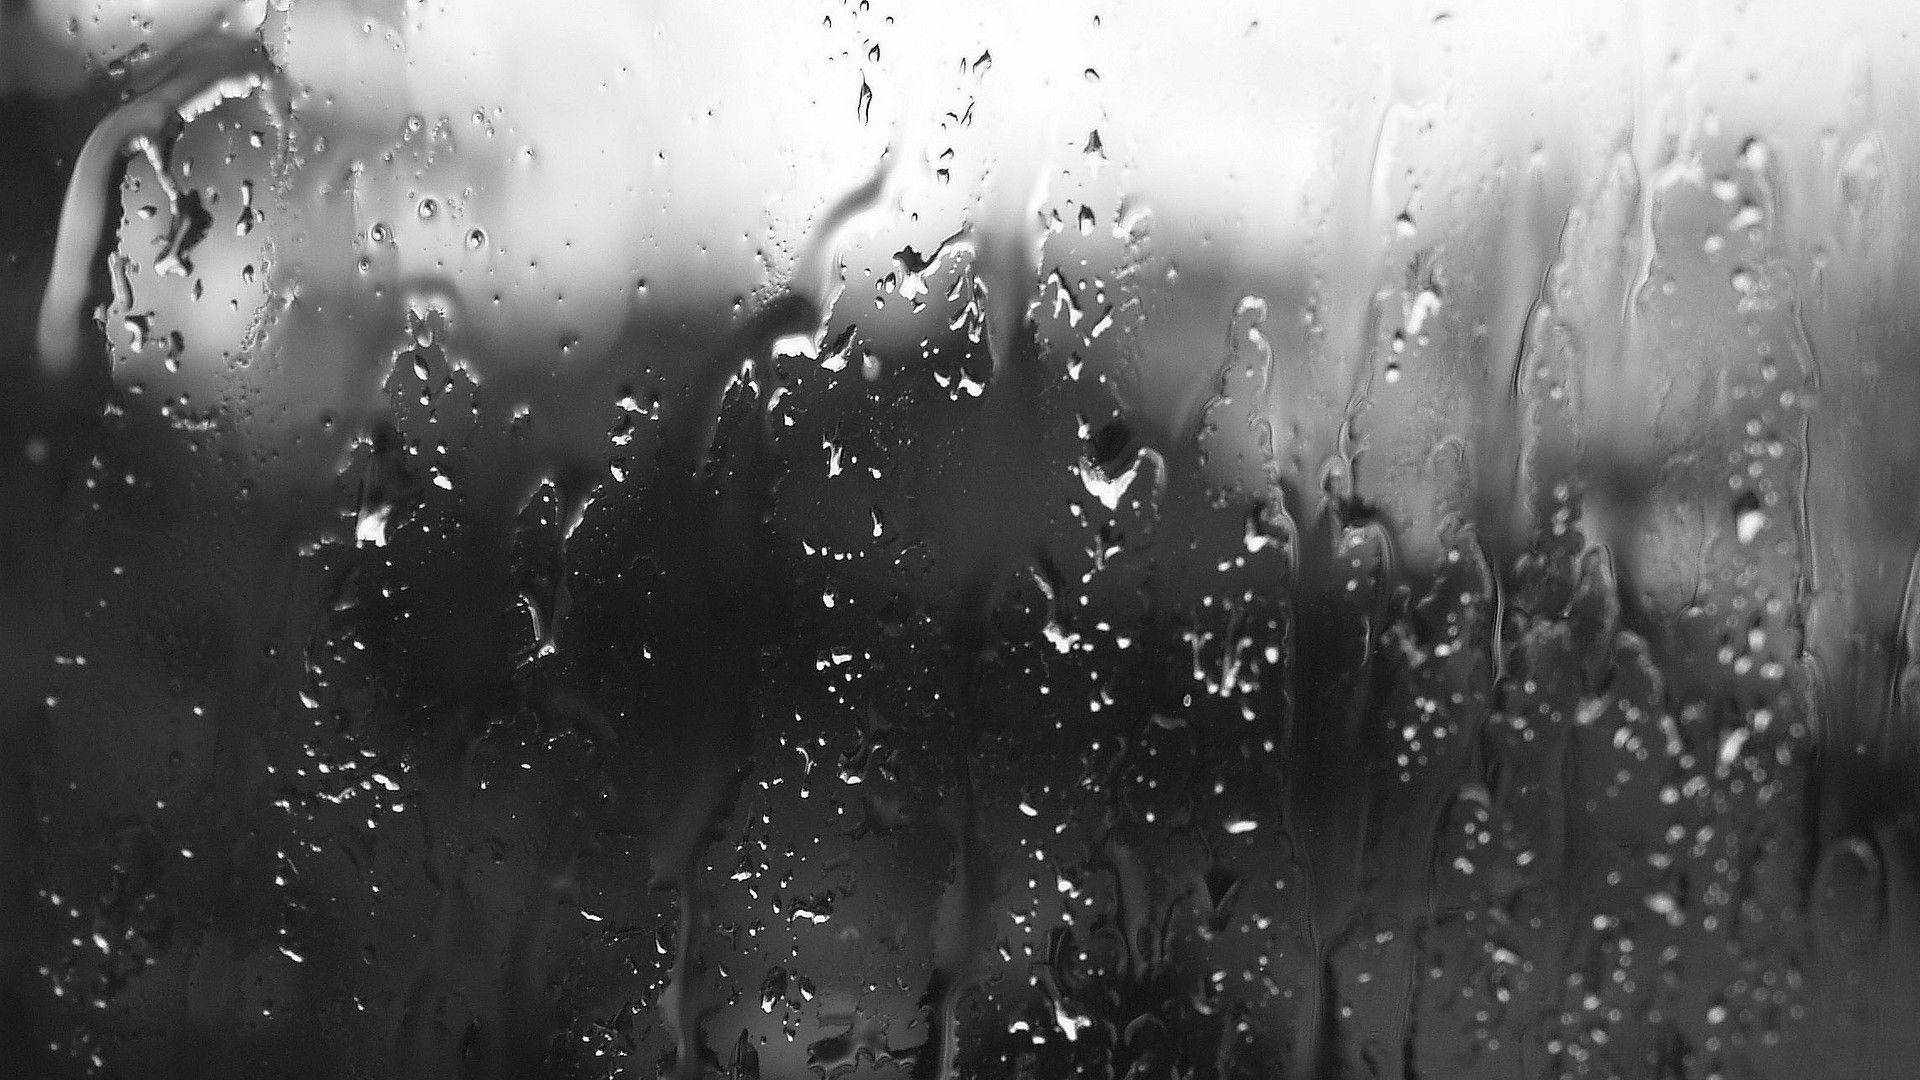 Greyscale Falling Raindrops On A Glass Pane Background